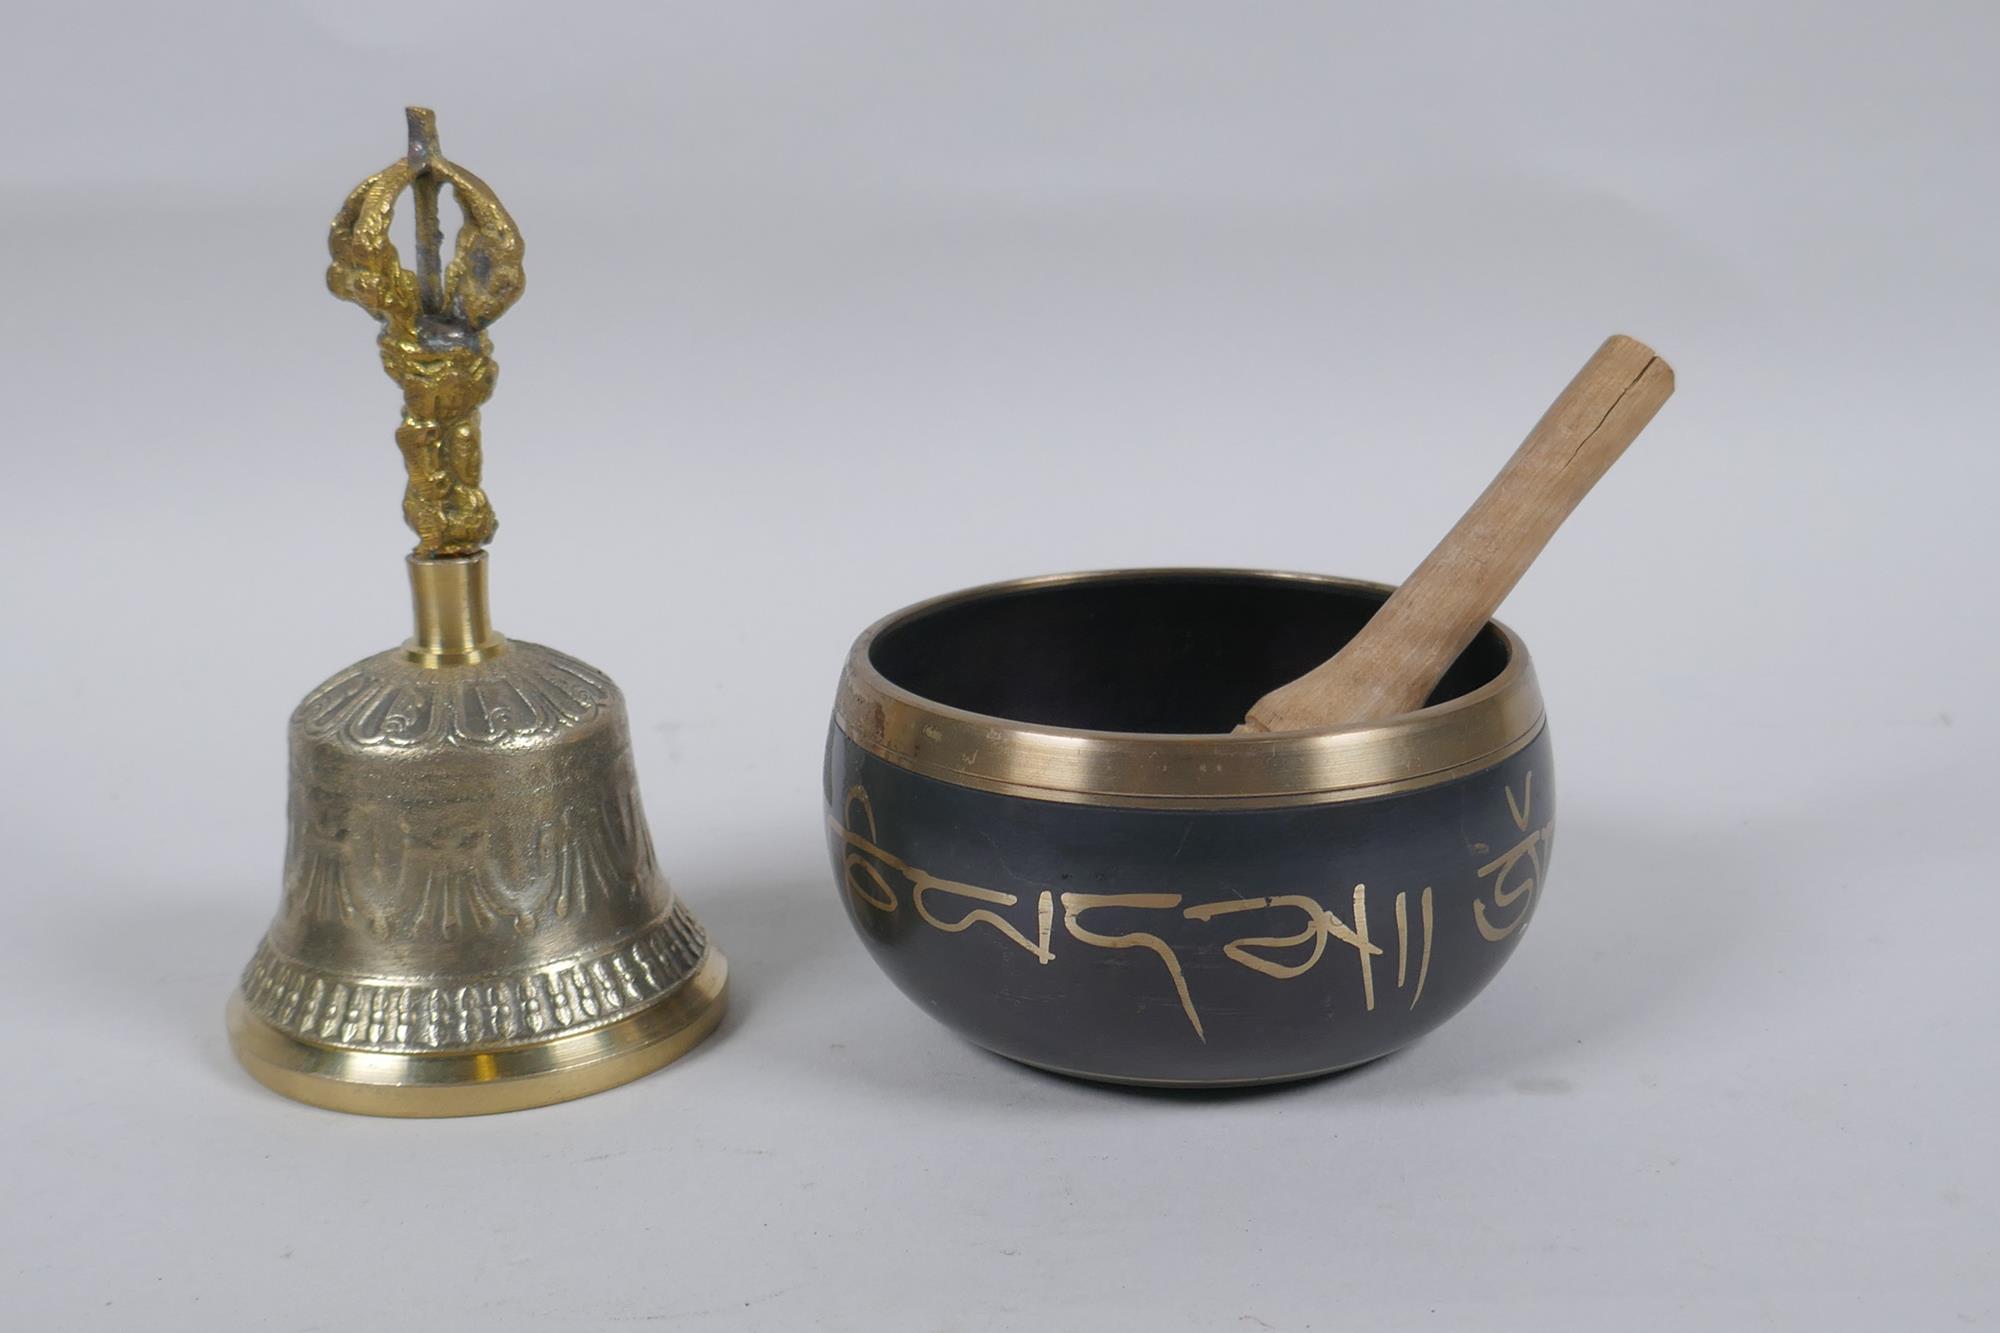 A Tibetan bronze singing bowl with script decoration and wood beater, and a brass ceremonial bell - Image 2 of 5